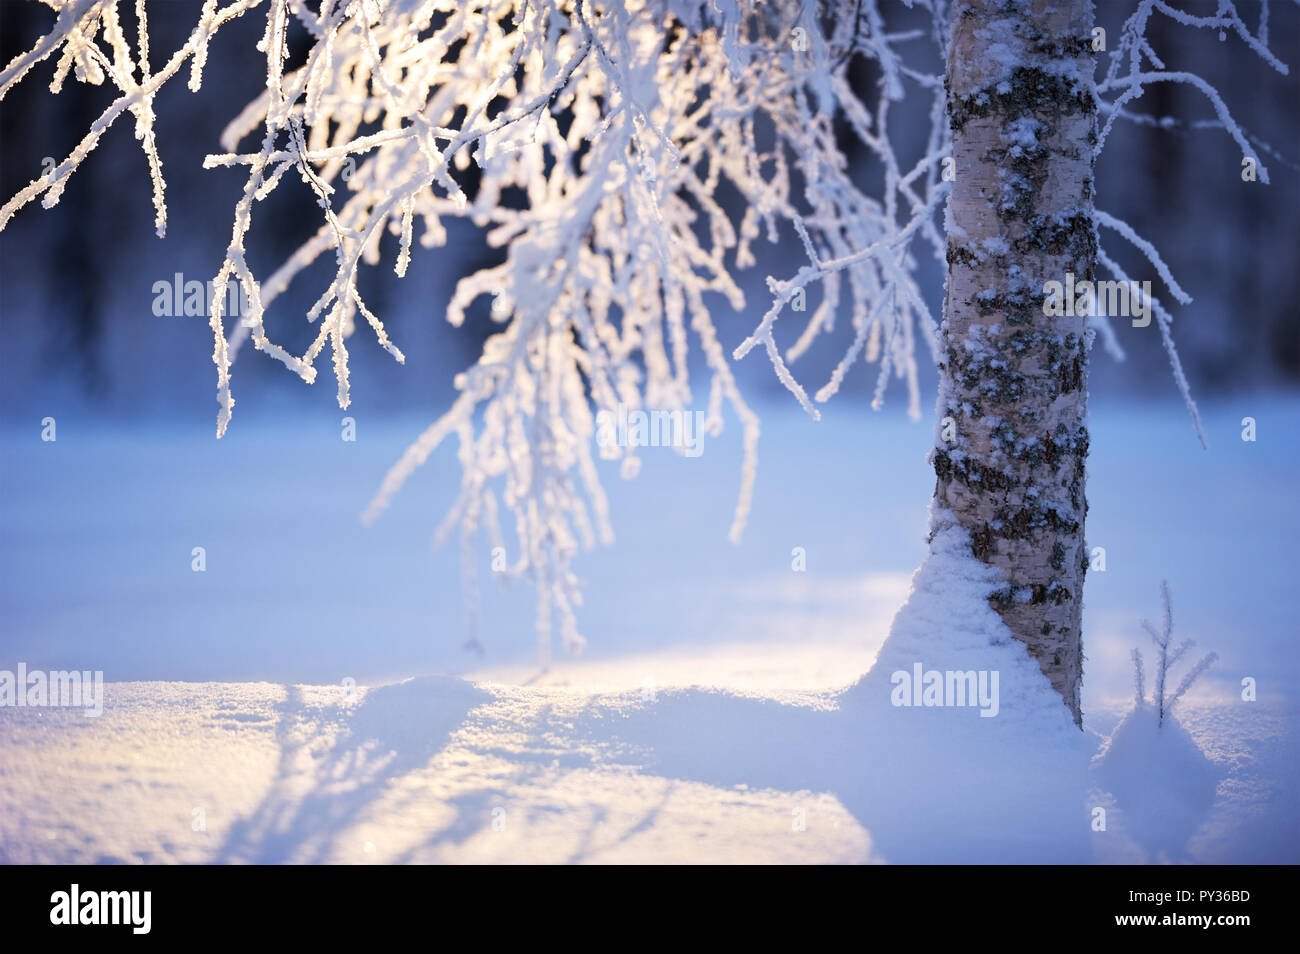 Birch tree trunk and branches covered with snow. Selective focus and shallow depth of field. Stock Photo